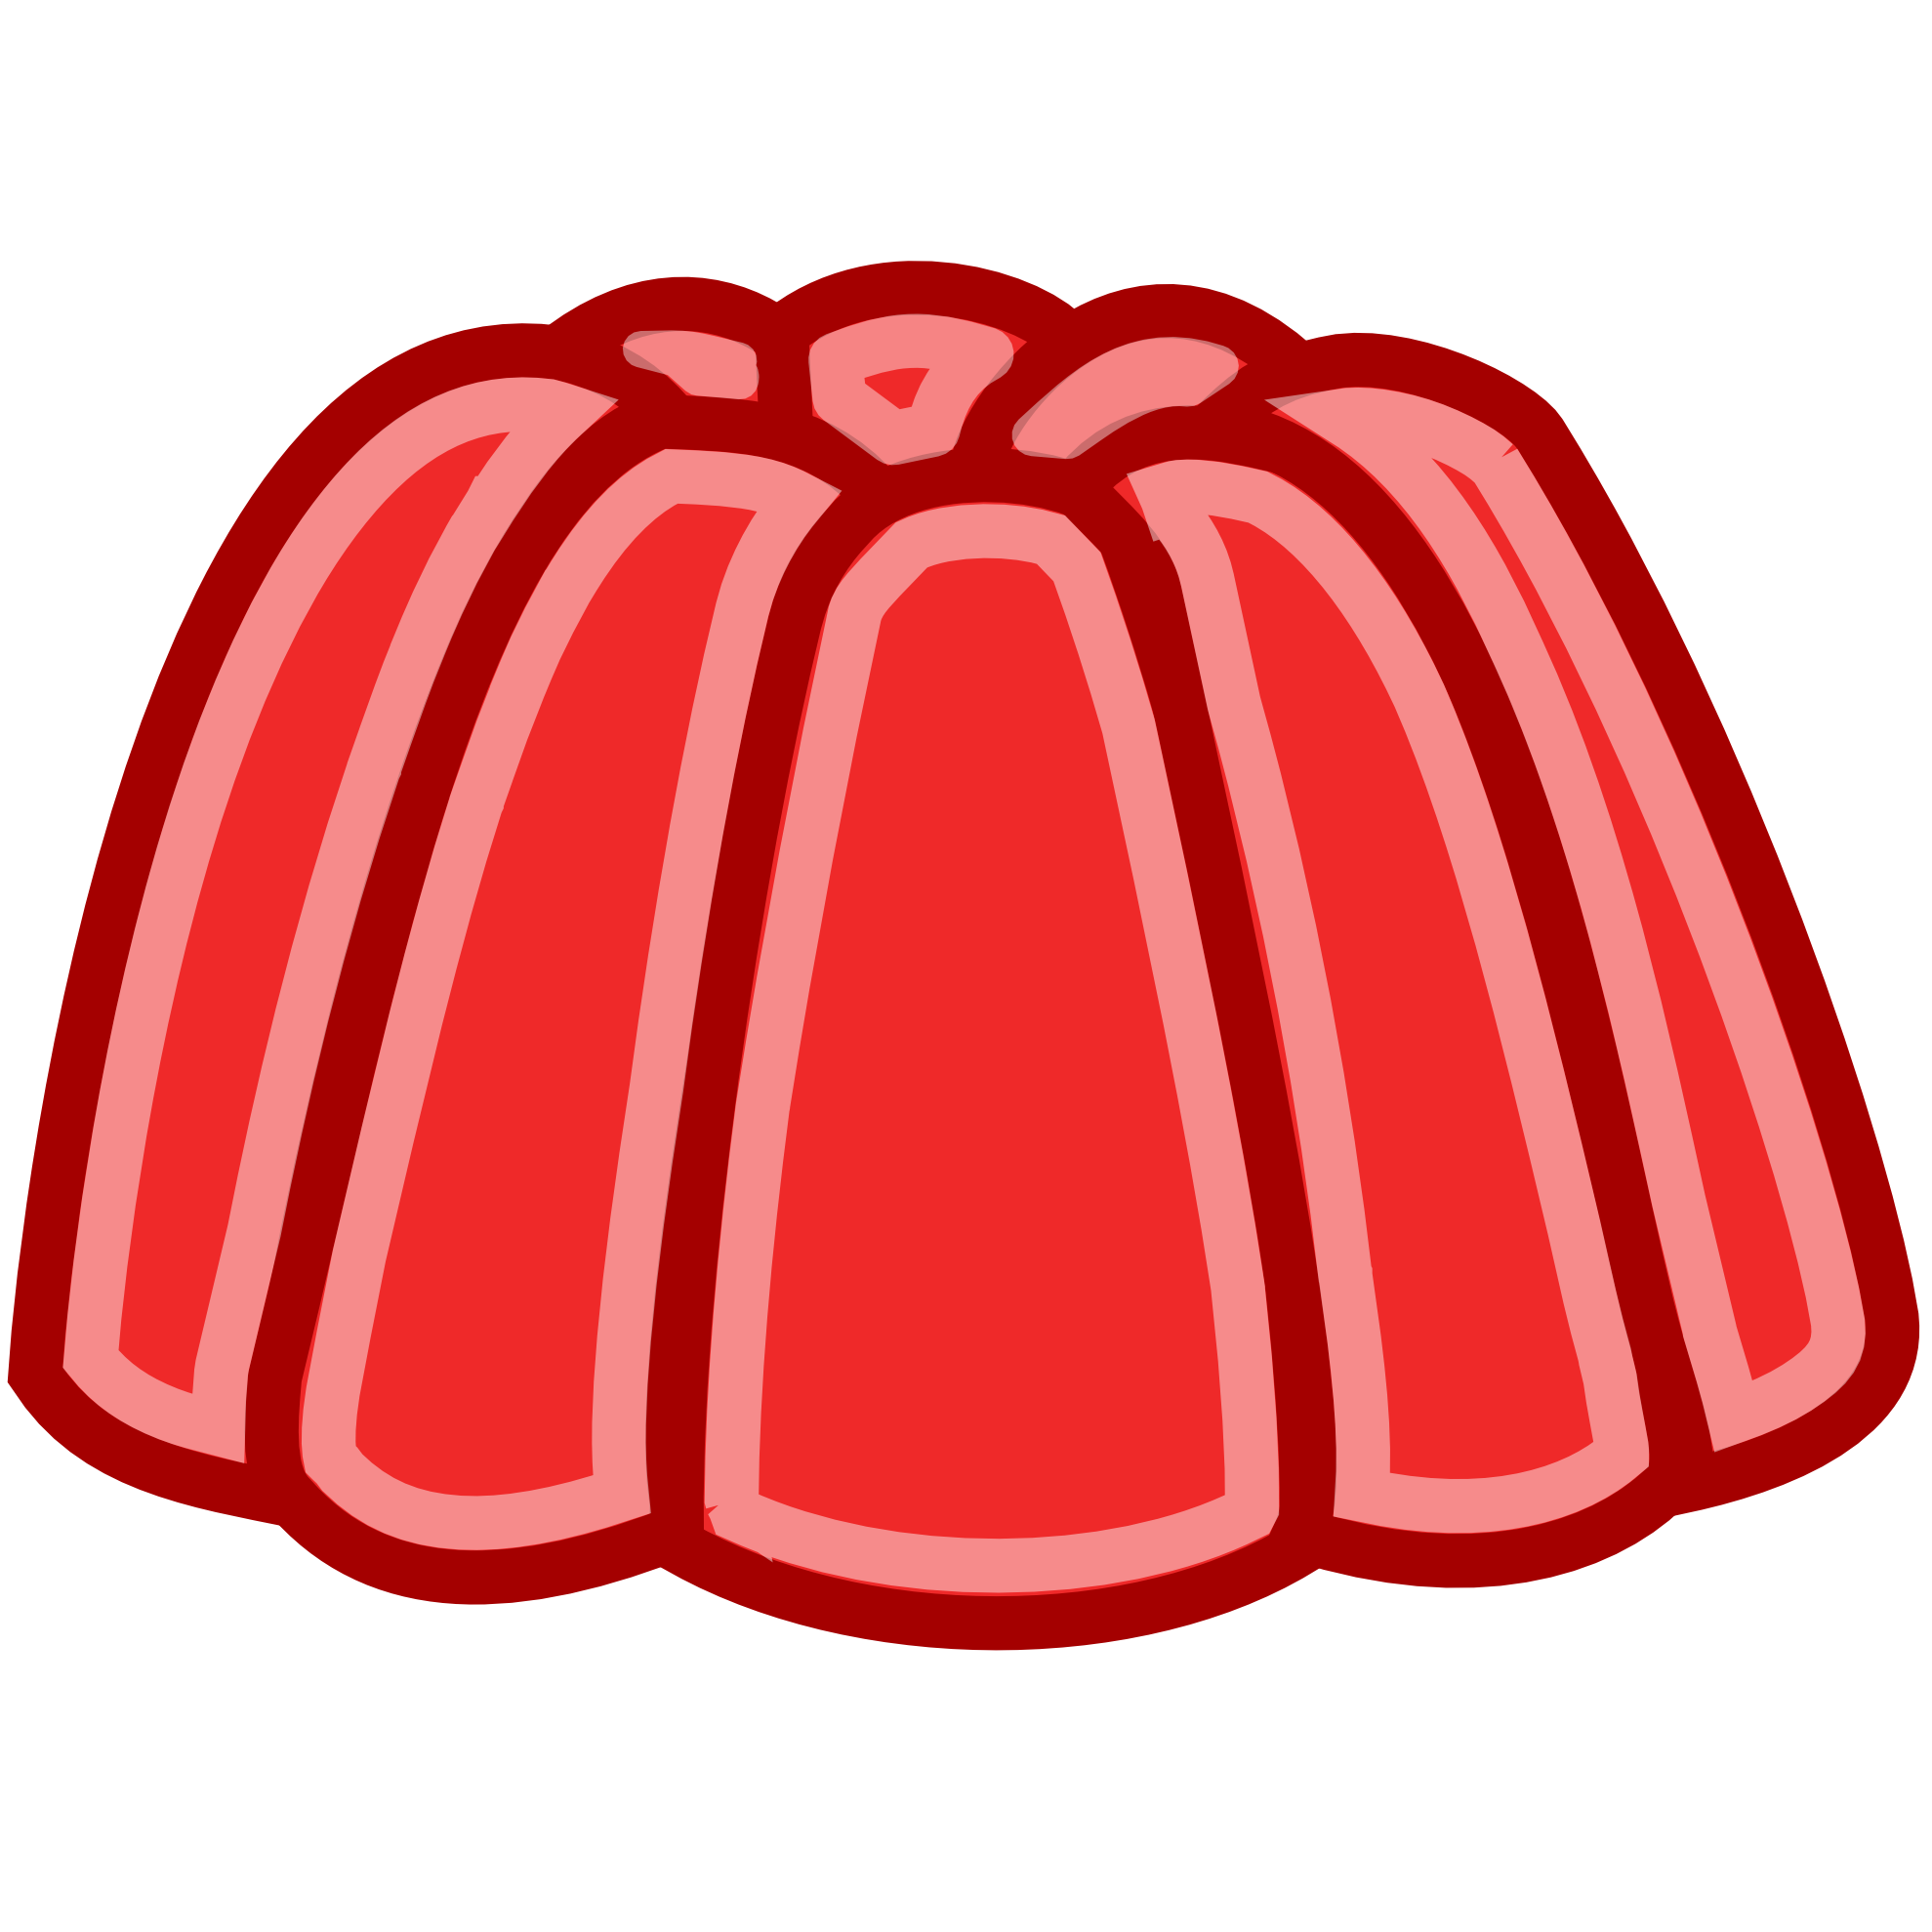 Jelly   Clipart Best